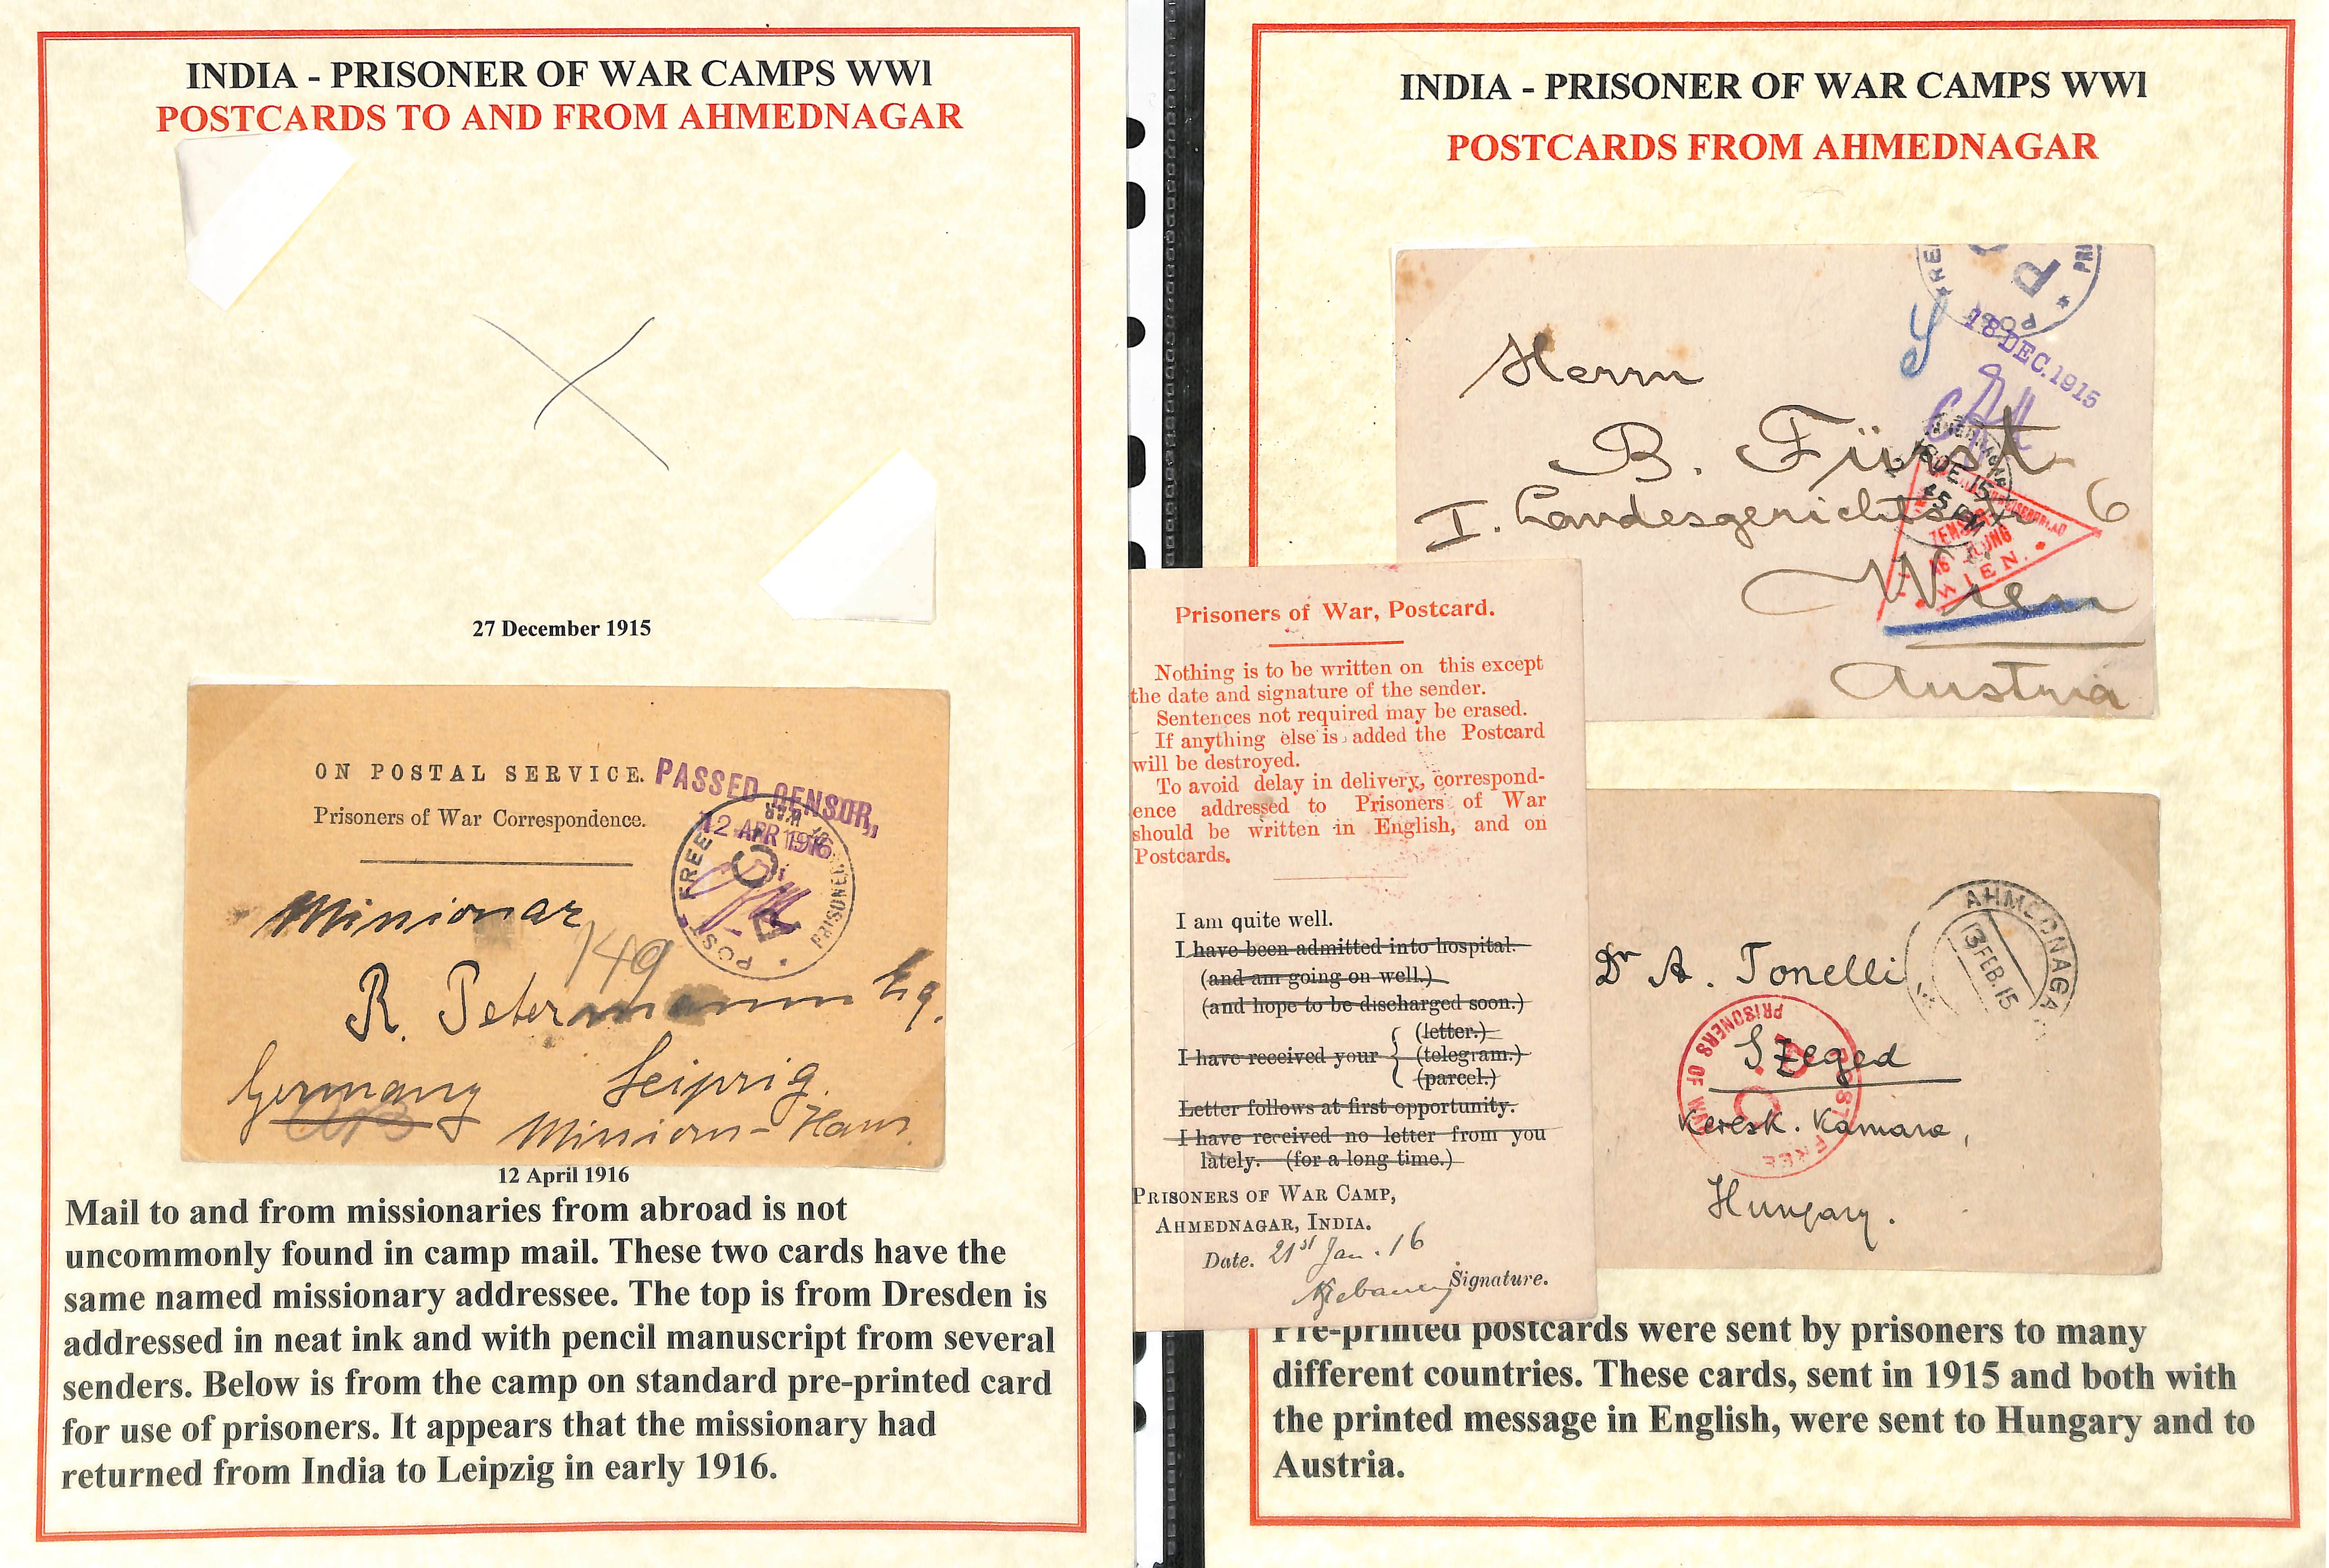 Ahmednagar. 1914-19 Printed Prisoner of War Postcards, the reverse with the usual five short